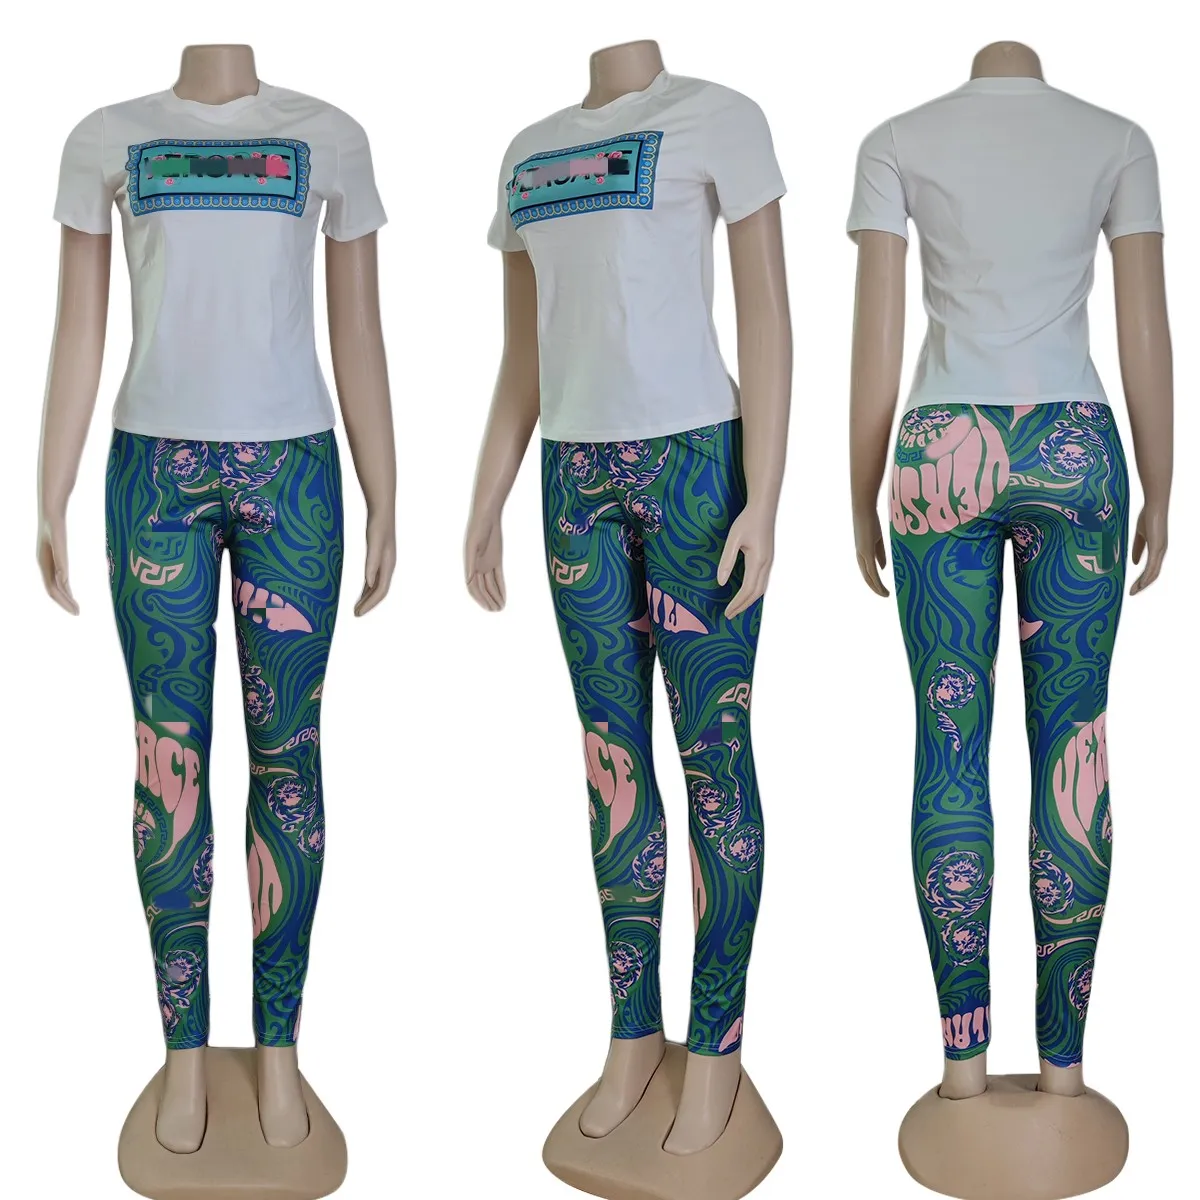 Womens Two Piece Pants Summer Outfits Casual Print Crew Neck T-shirt and Legging Sets Free Ship